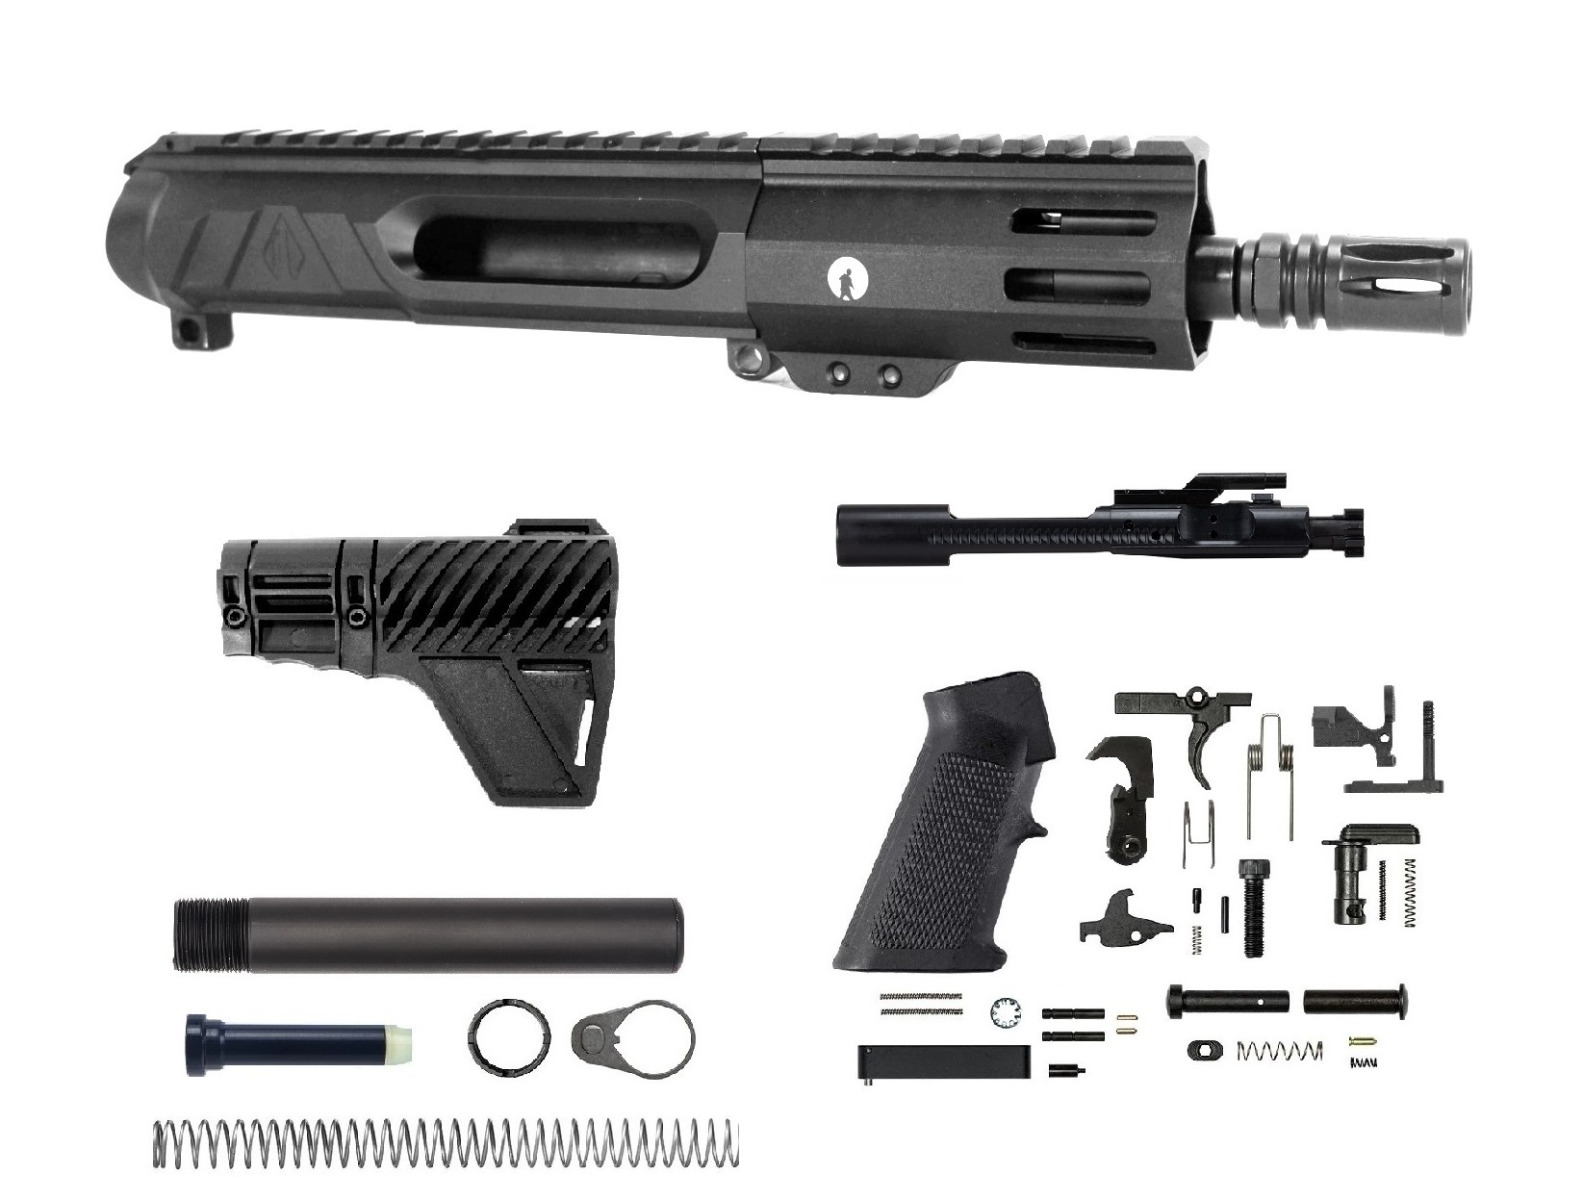 5 inch AR-15 NR Side Charging 5.56 NATO M-LOK Melonite Upper Kit Suppressor Ready | Pro2A Tactical